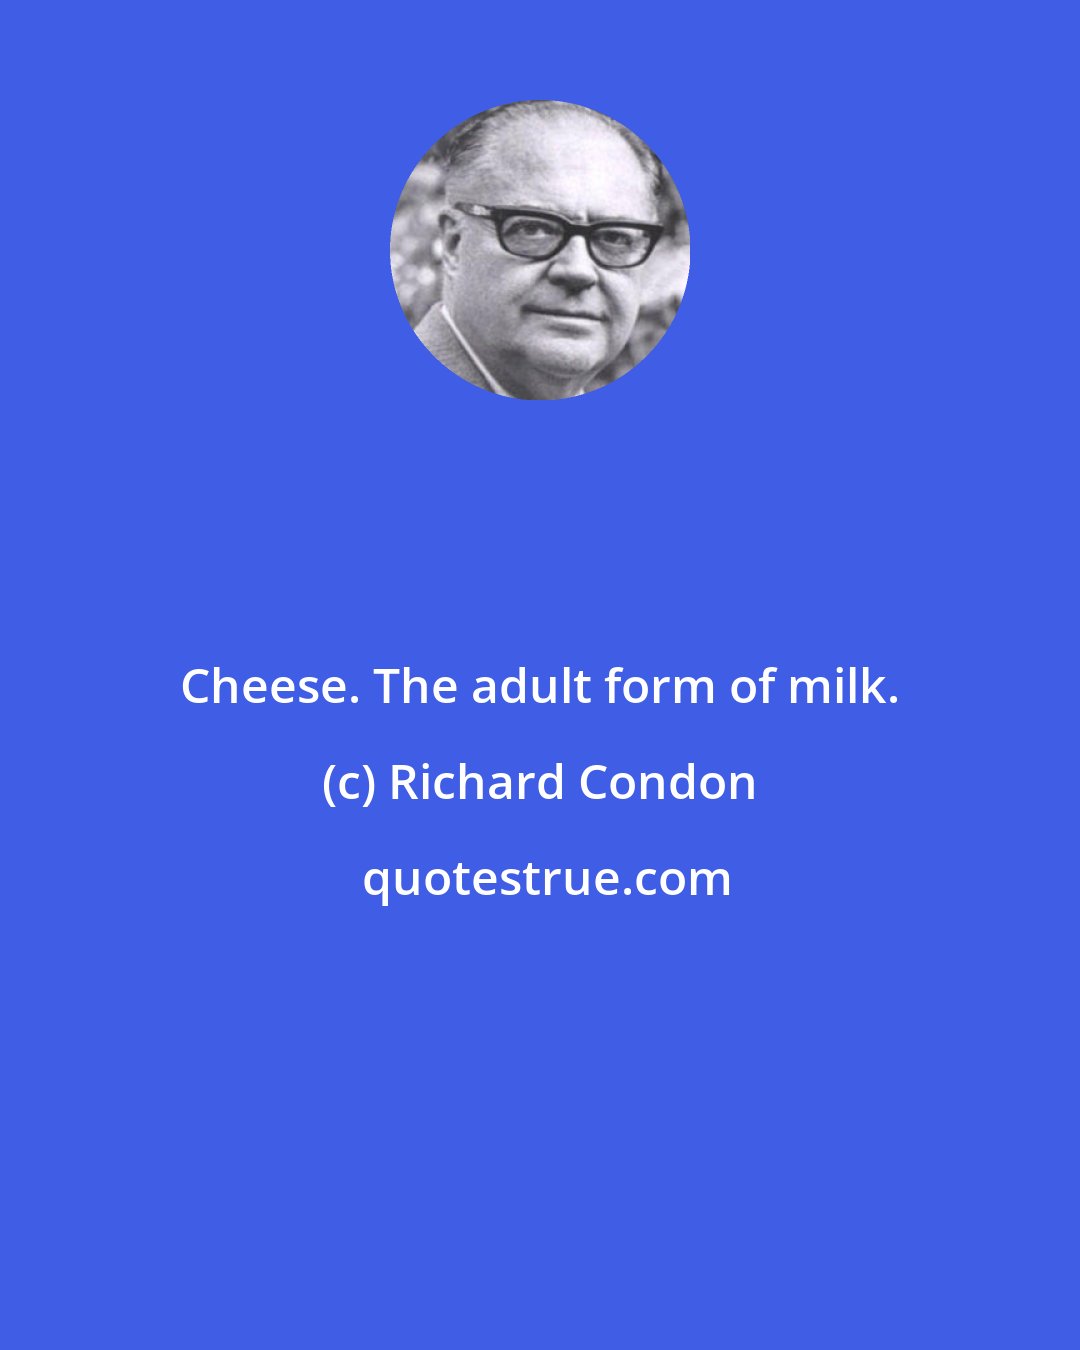 Richard Condon: Cheese. The adult form of milk.